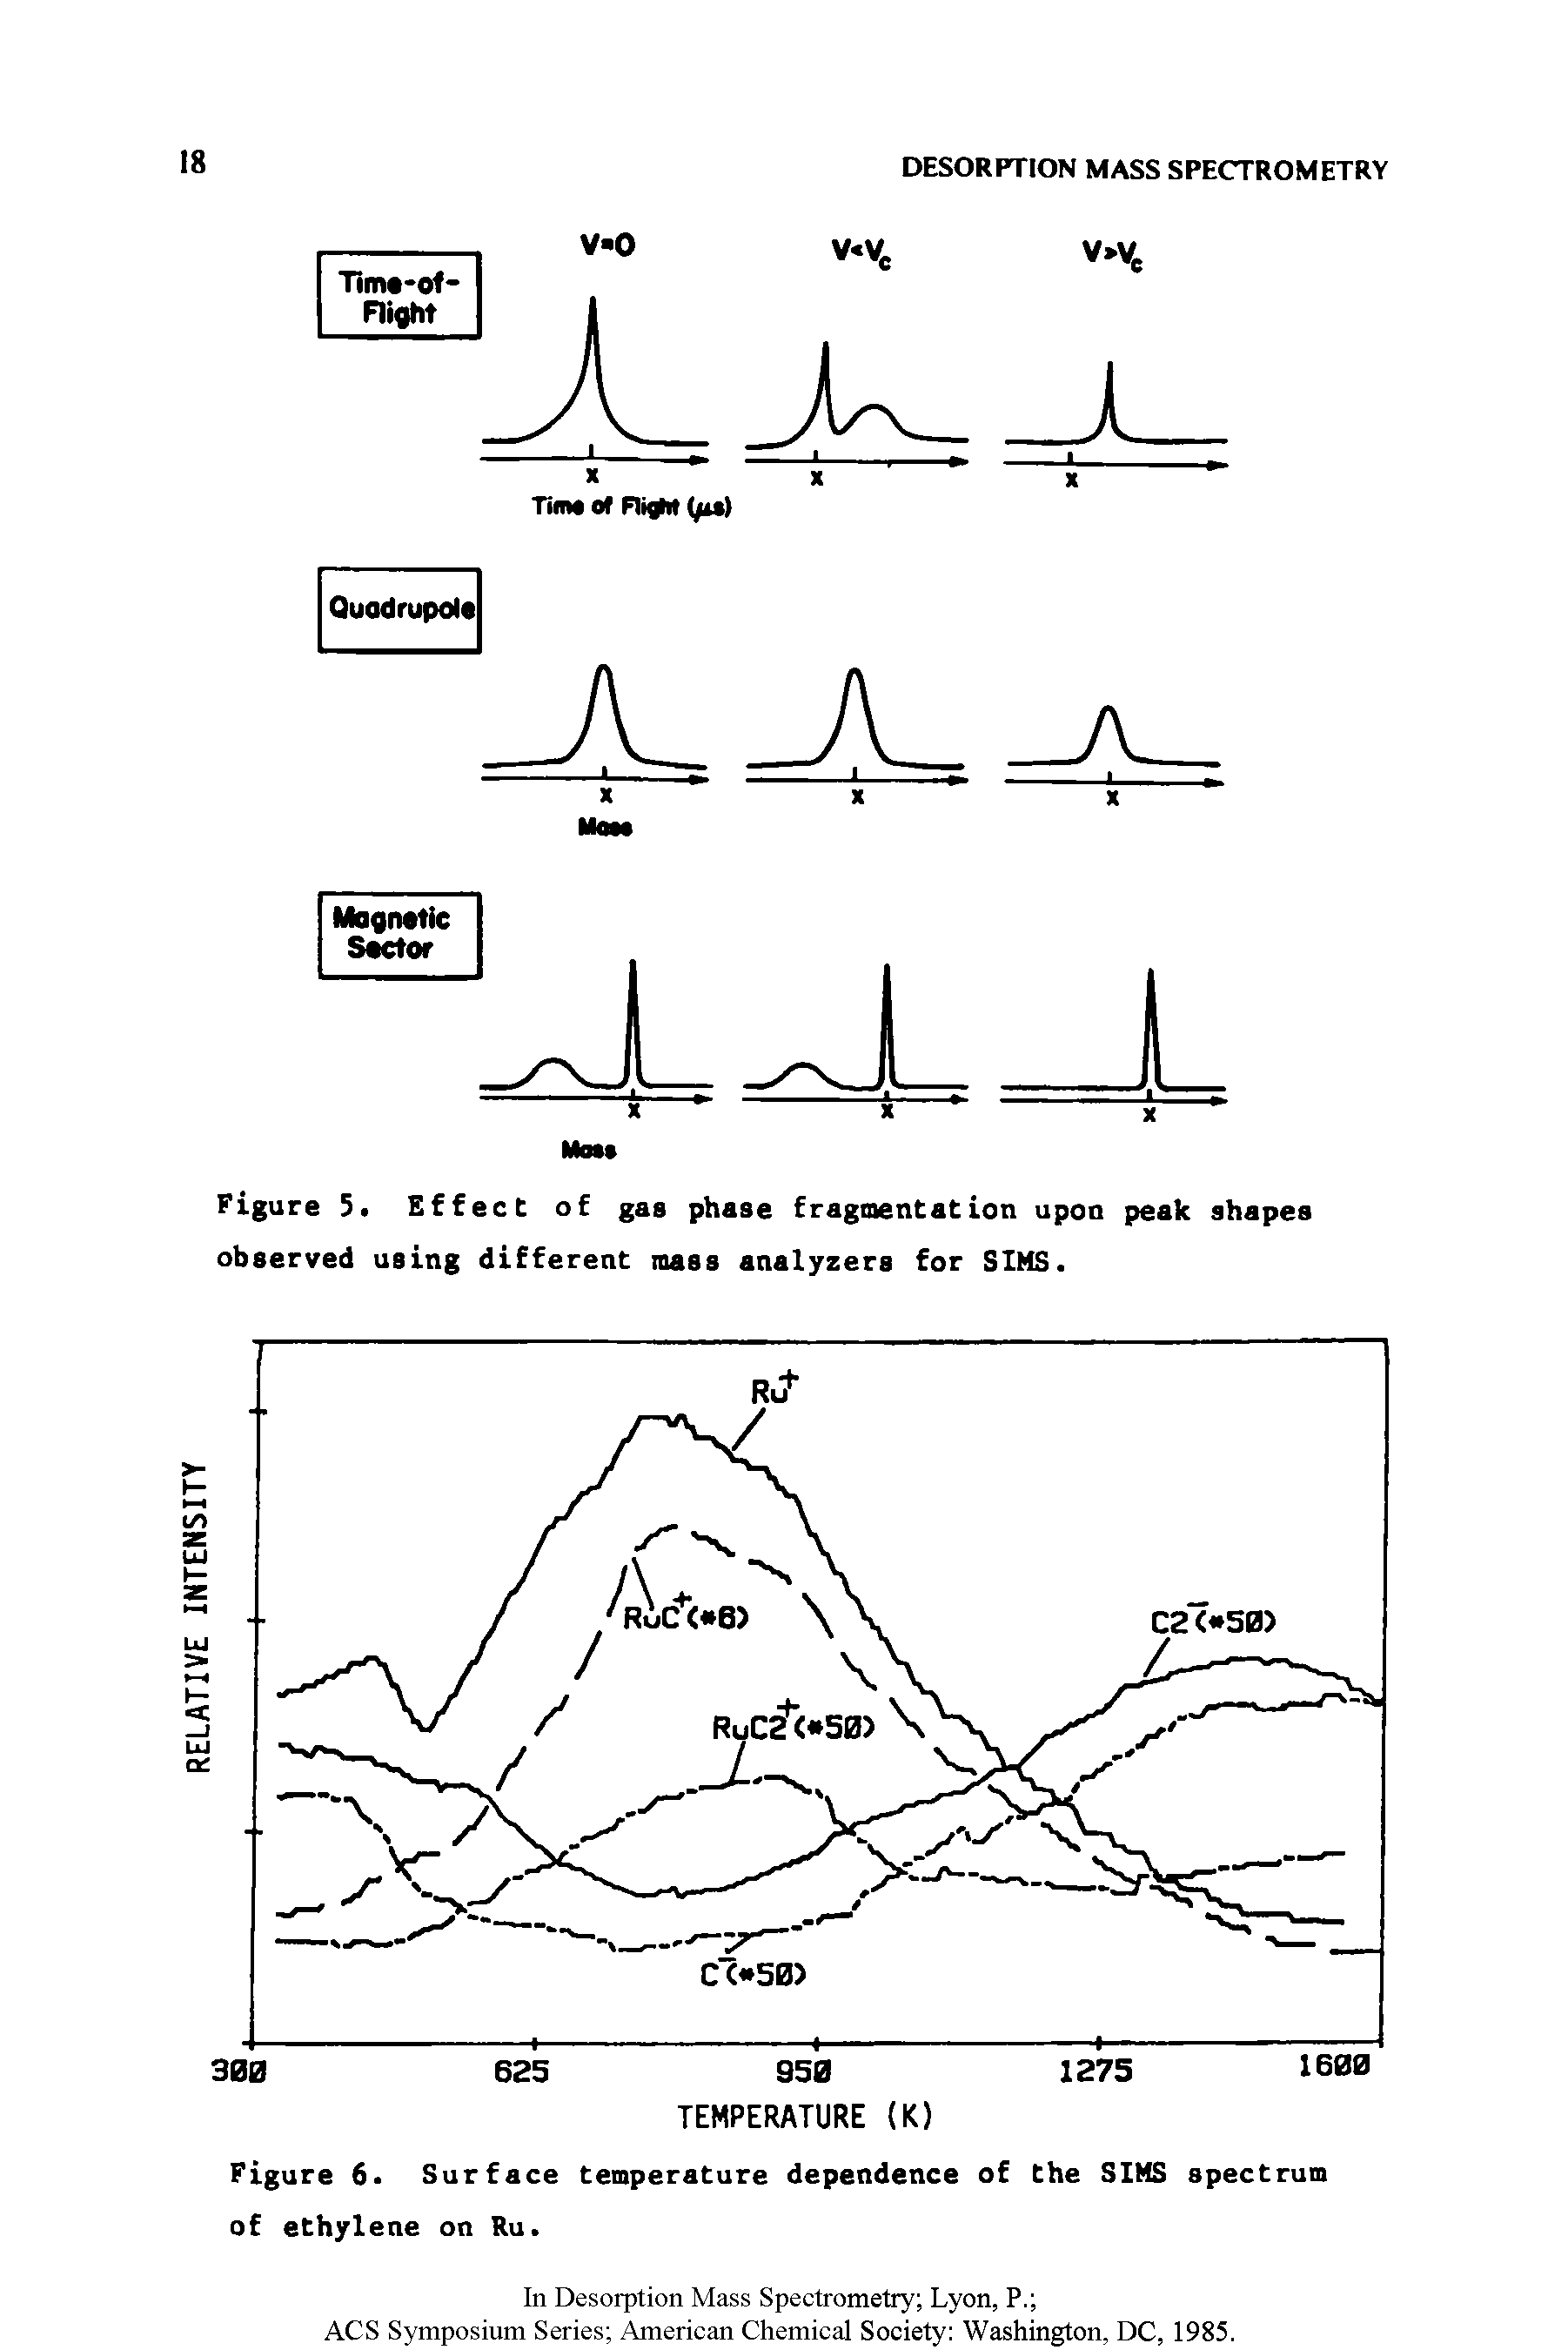 Figure 5. Effect of gas phase fragmentation upon peak shapes observed using different mass analyzers for SIMS.